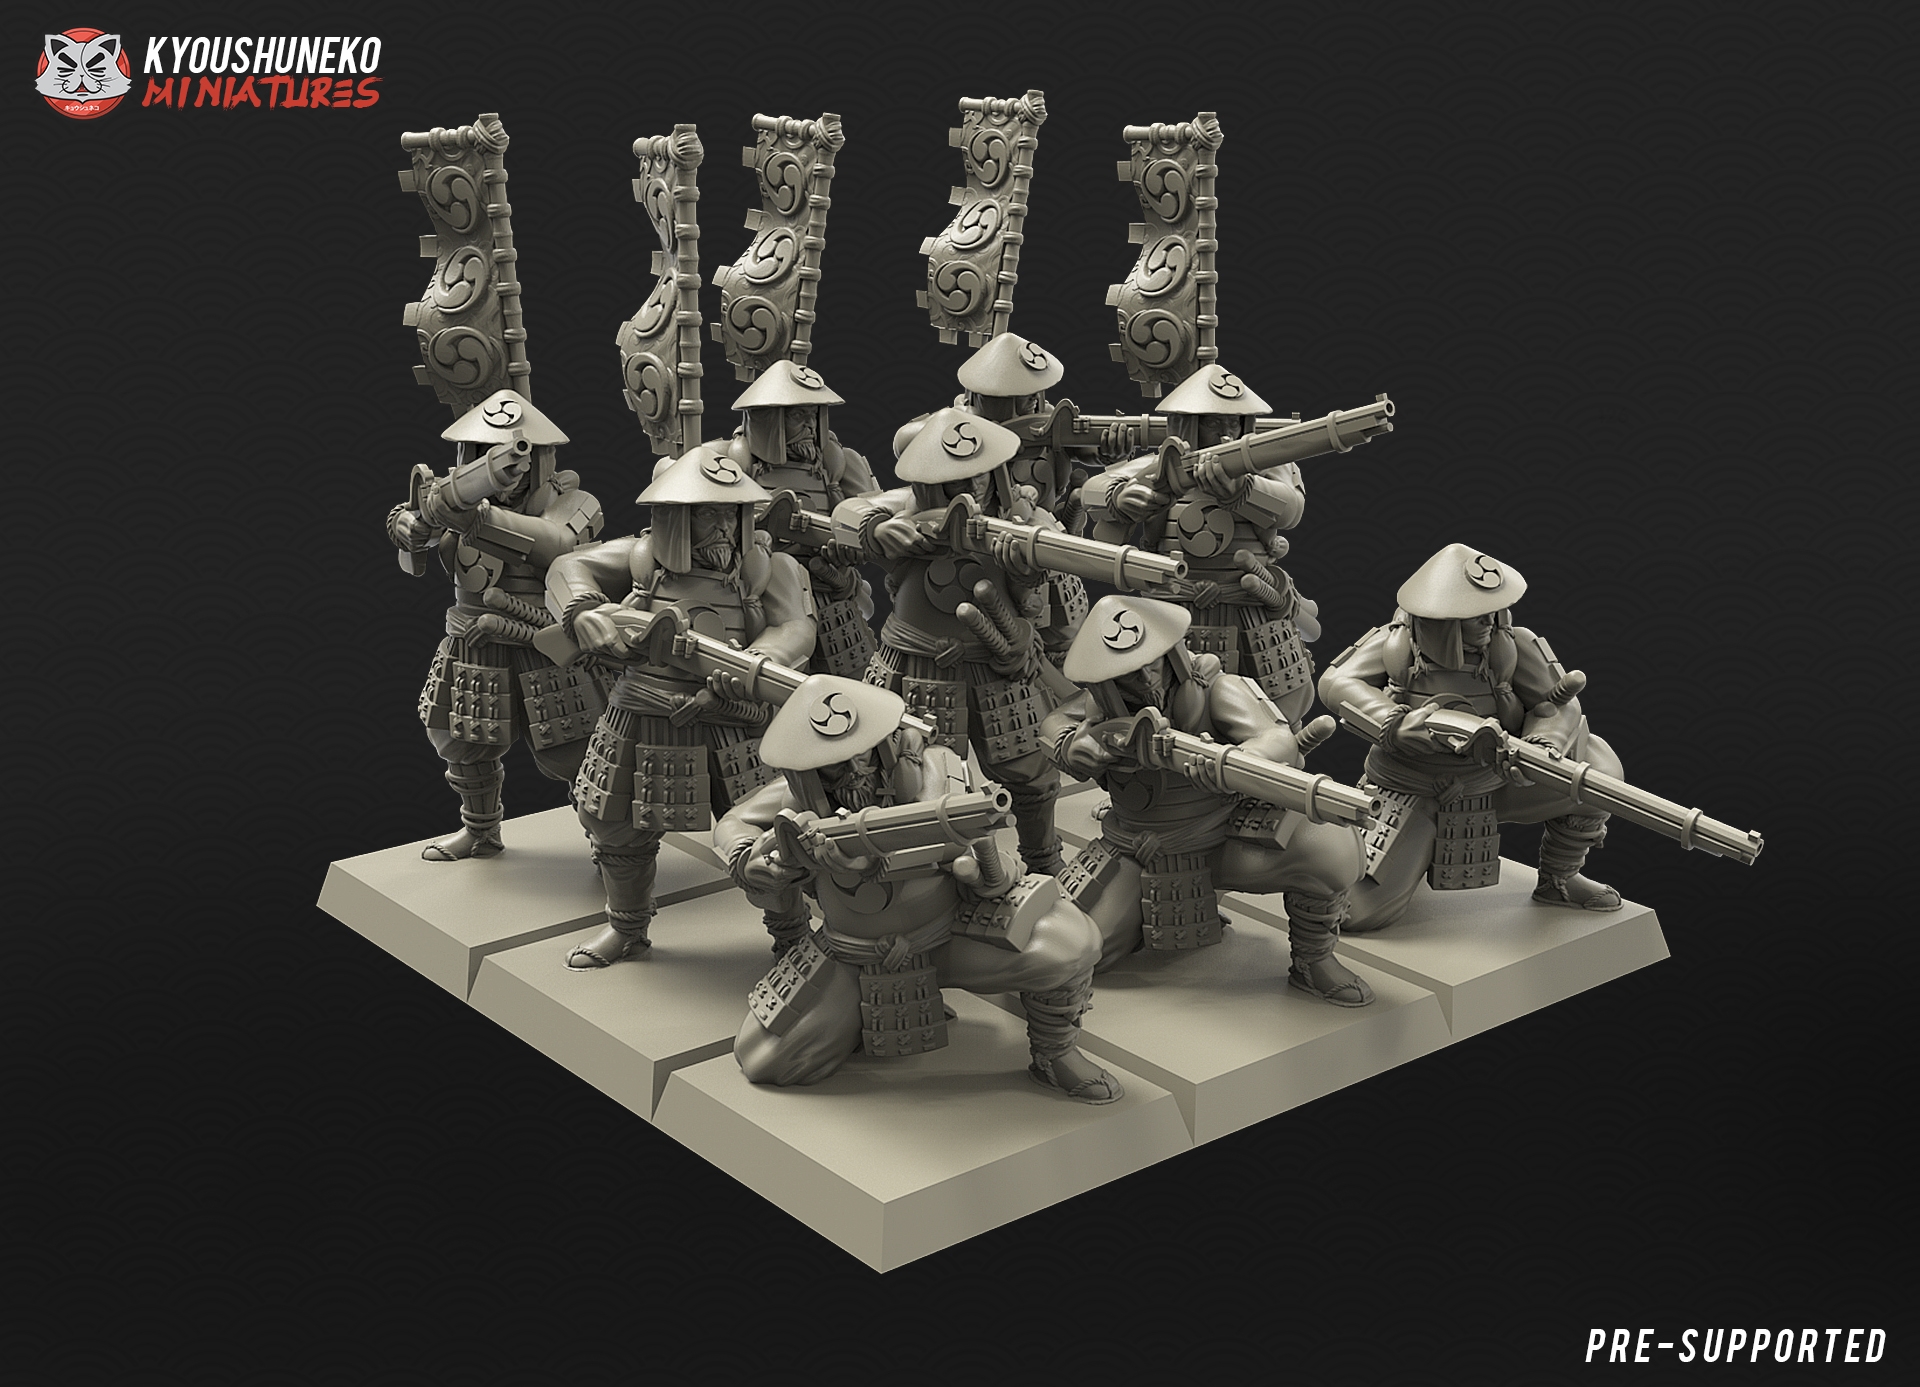 Japanese Ashigaru Musketmen made by Kyoushuneko miniature best tabletop miniature in the world and also this are made from resin so it will be more strong from scratches and and can avoid breaking from fall.